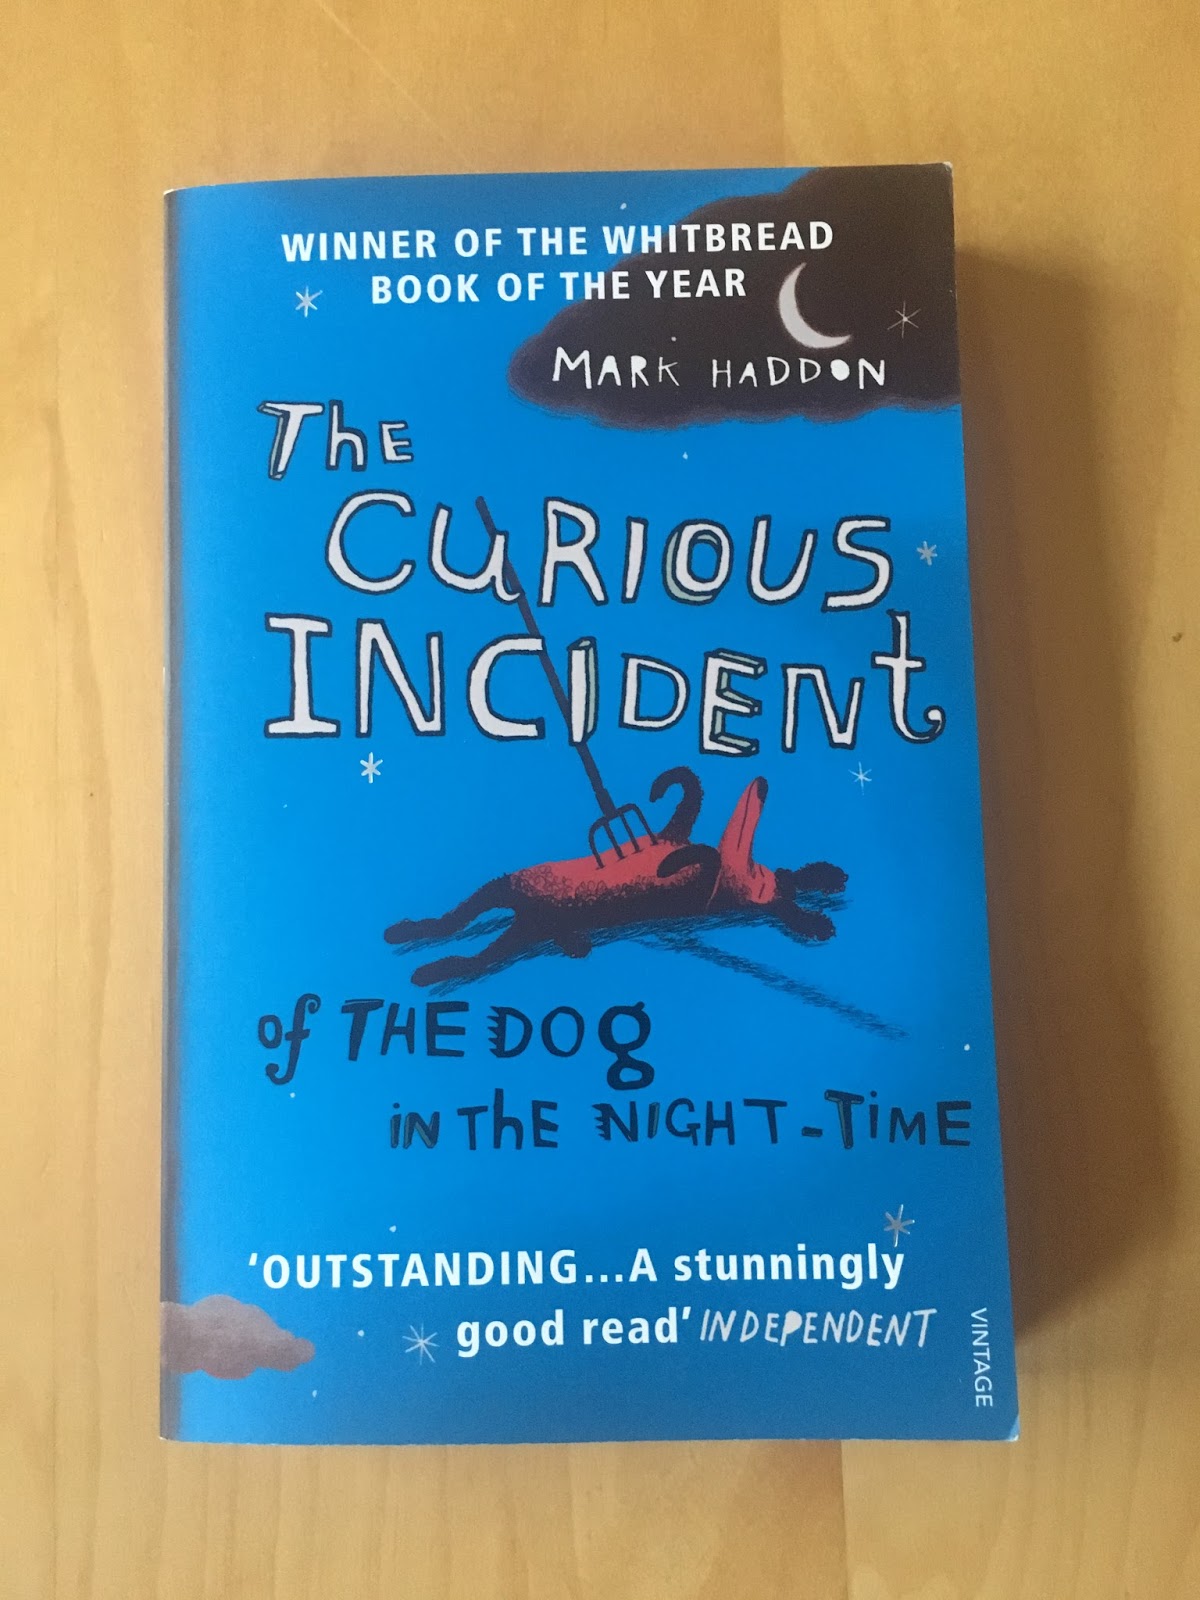 Cbailey31 Books Amp Blogs Book Review The Curious Incident Of The Dog In The Night Time By Mark